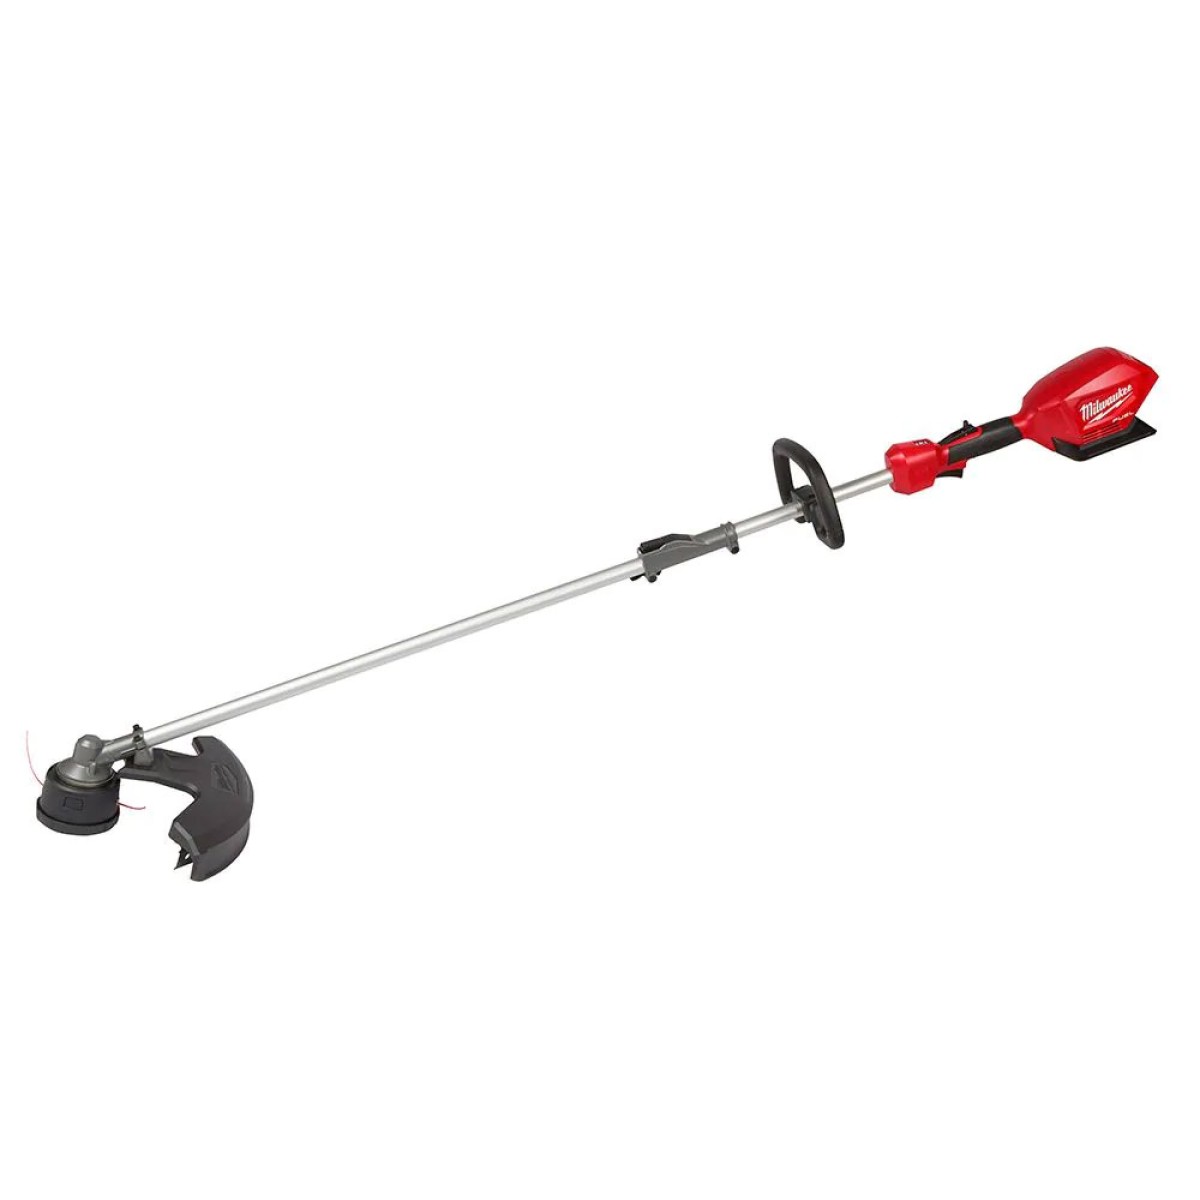 M18 Fuel Power Head String Trimmer TOOL ONLY 2825-20ST